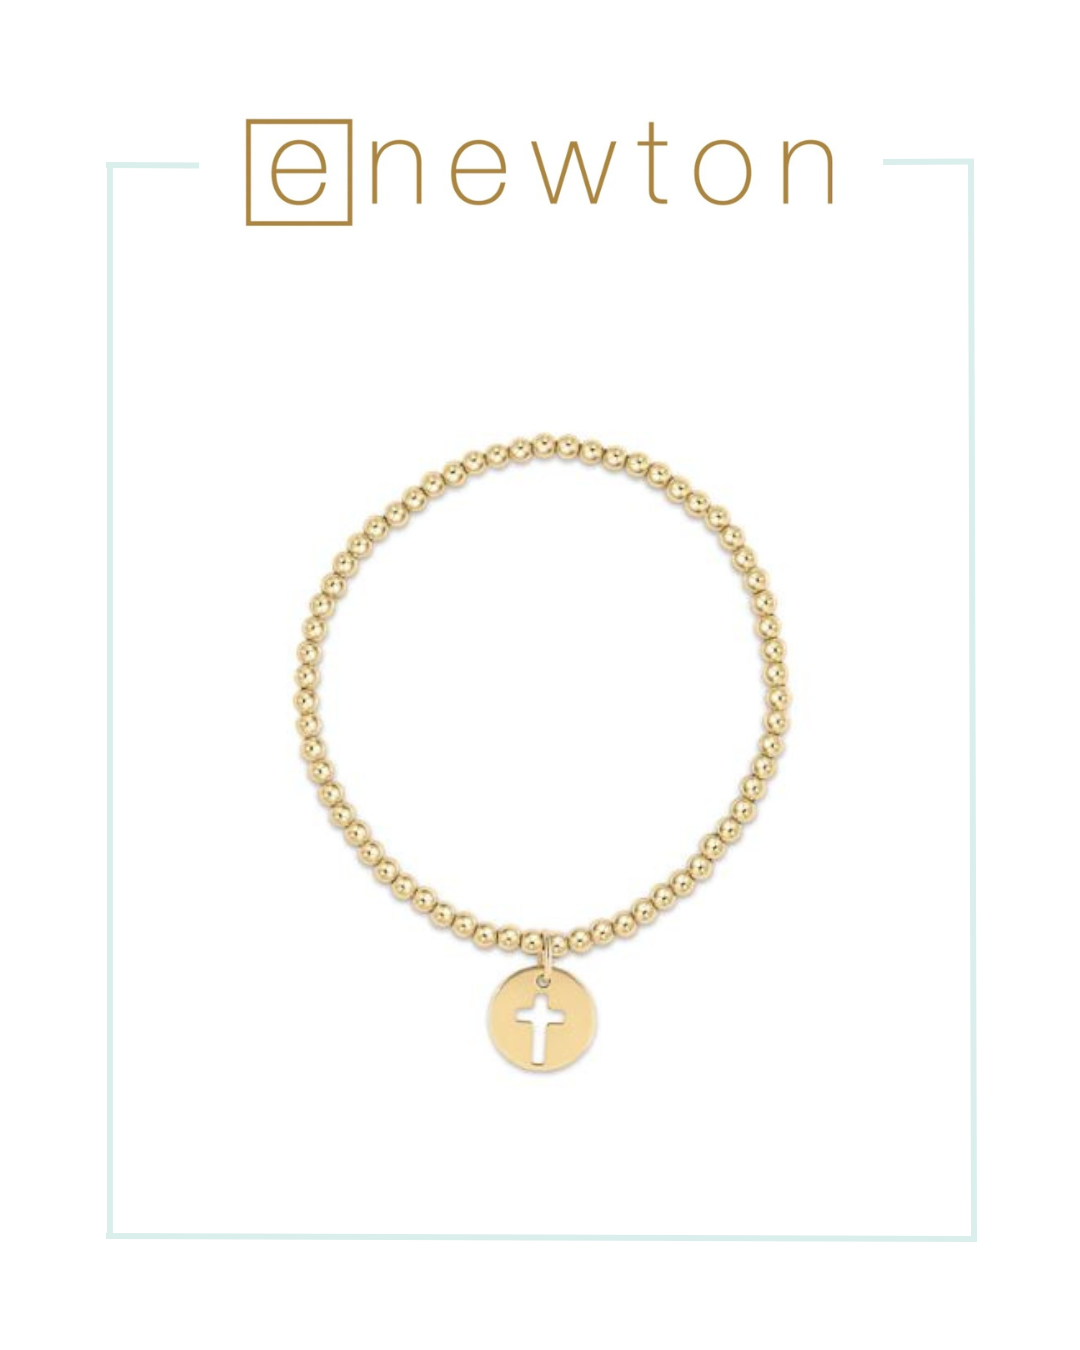 E Newton Classic Gold 3mm Bead Bracelet - Blessed Gold Disc-Bracelets-ENEWTON-The Village Shoppe, Women’s Fashion Boutique, Shop Online and In Store - Located in Muscle Shoals, AL.